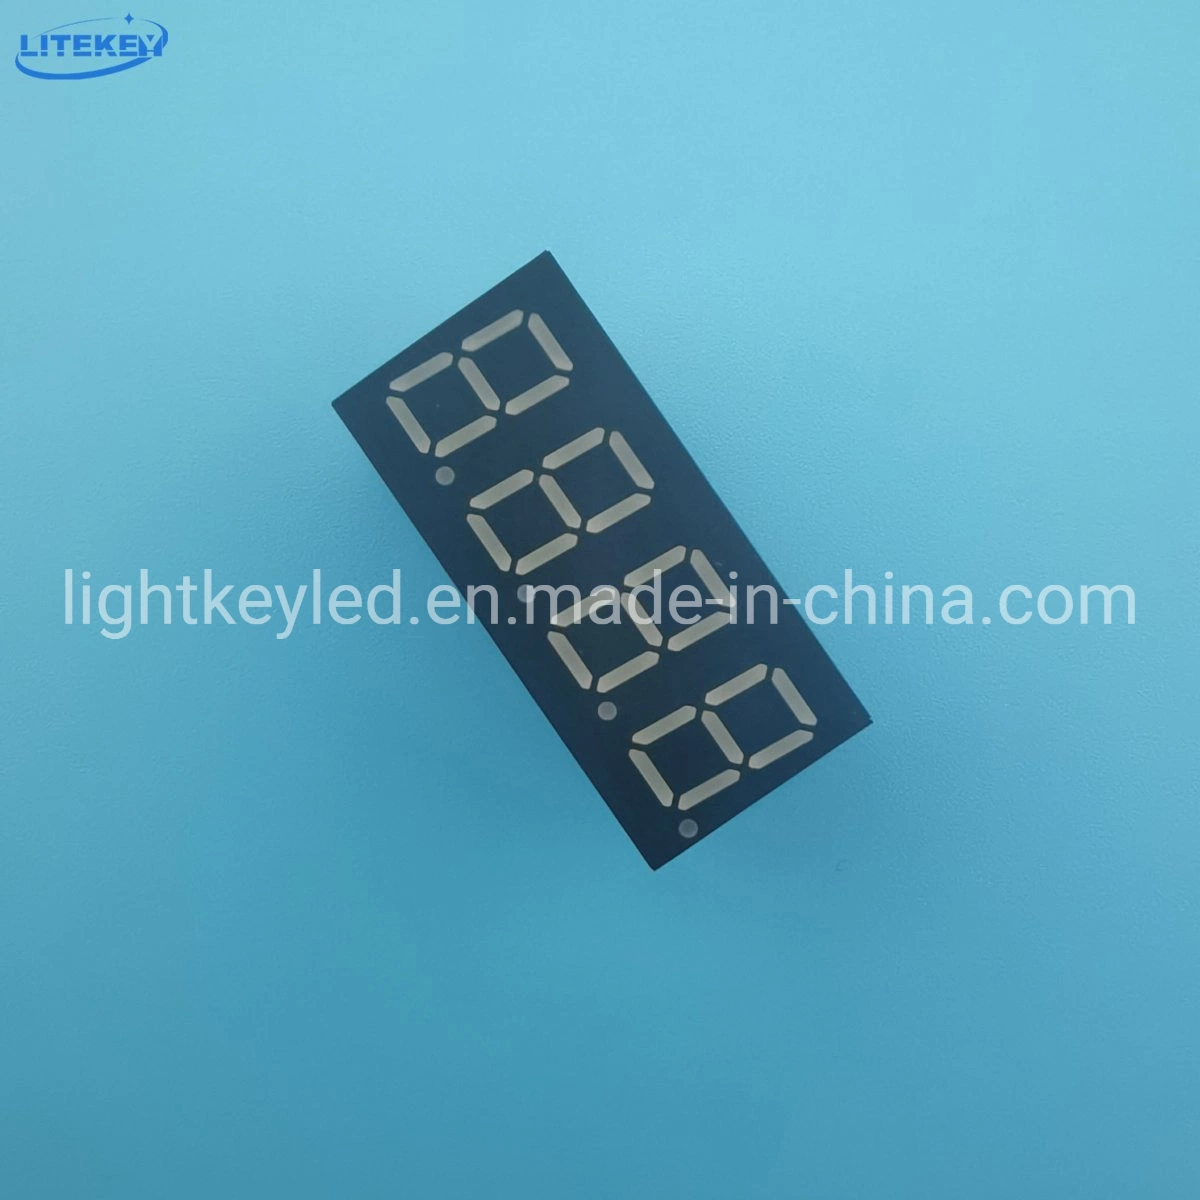 0.4 Inch 4 Digits 7 Segment LED Display with 4 Dp with RoHS From Expert Manufacturer